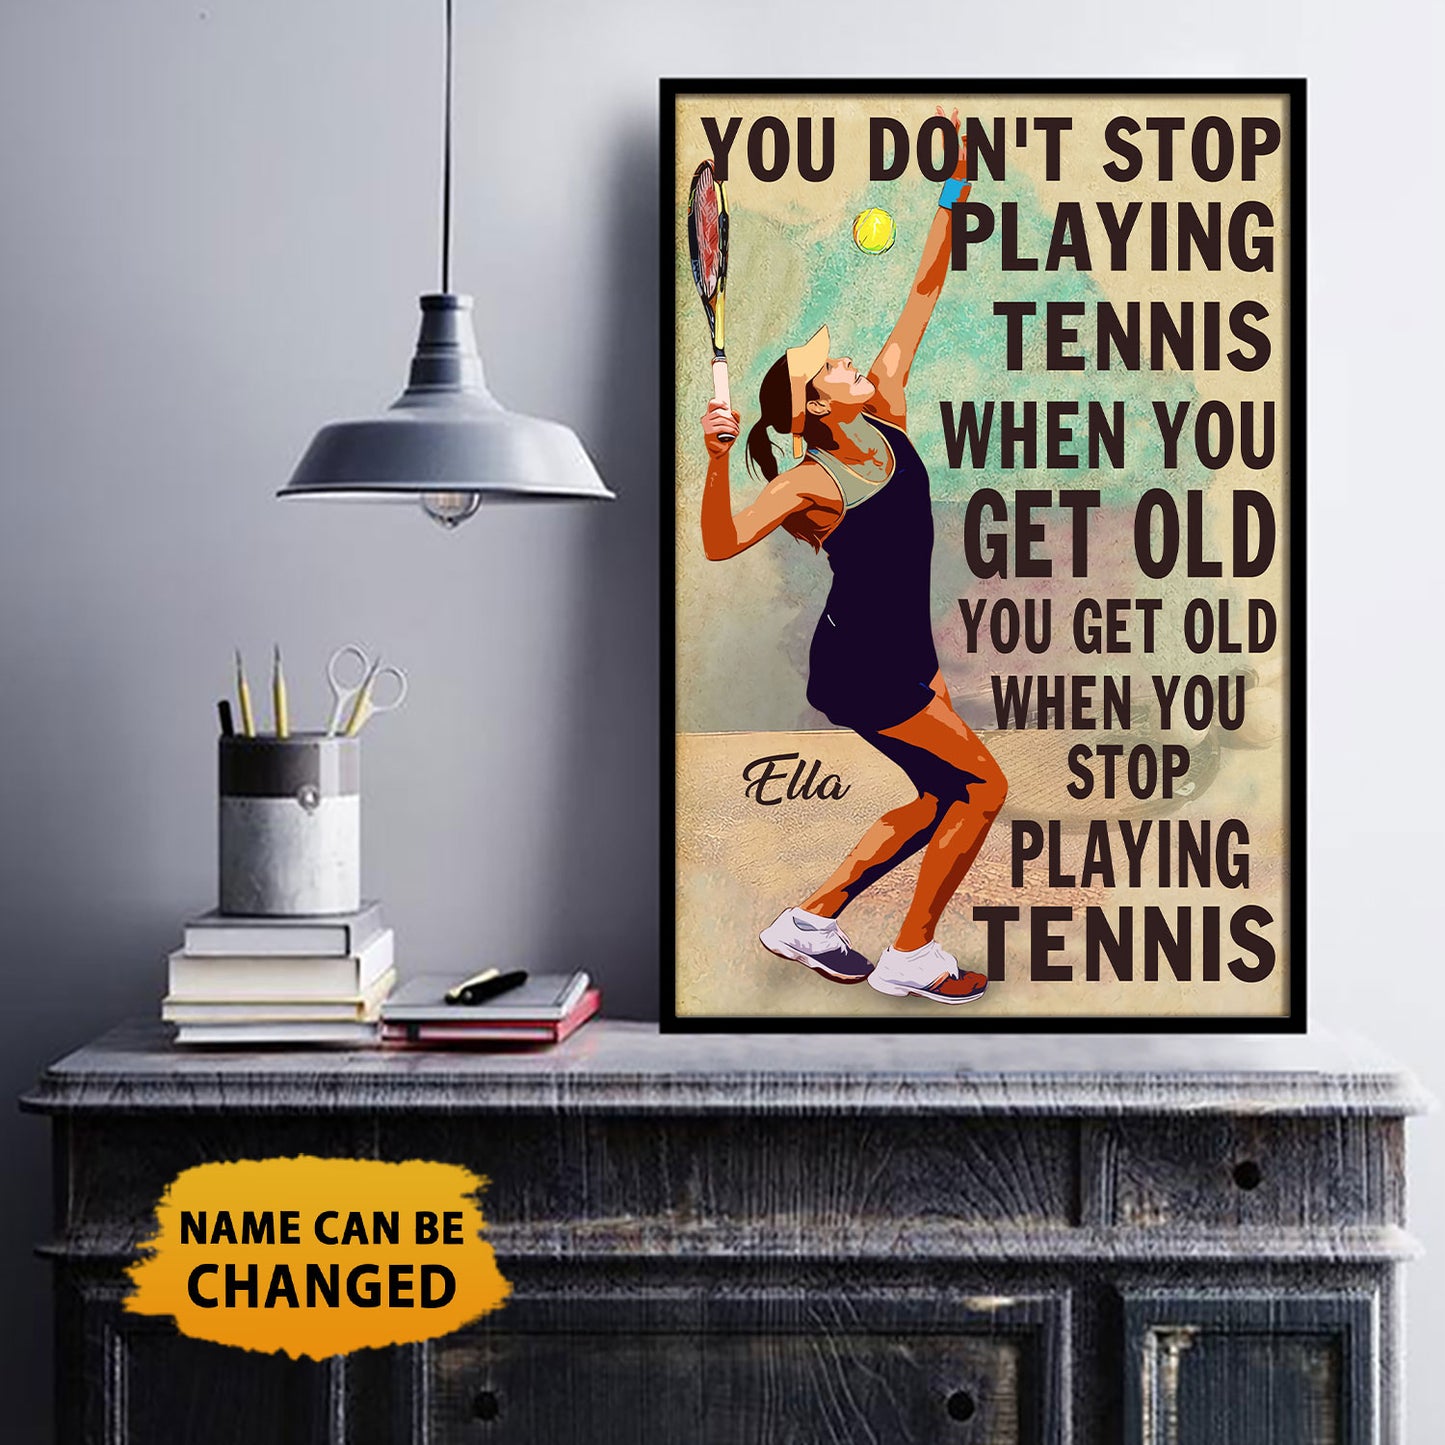 Tennis You Get Old When You Stop Playing Tennis Personalizedwitch Poster